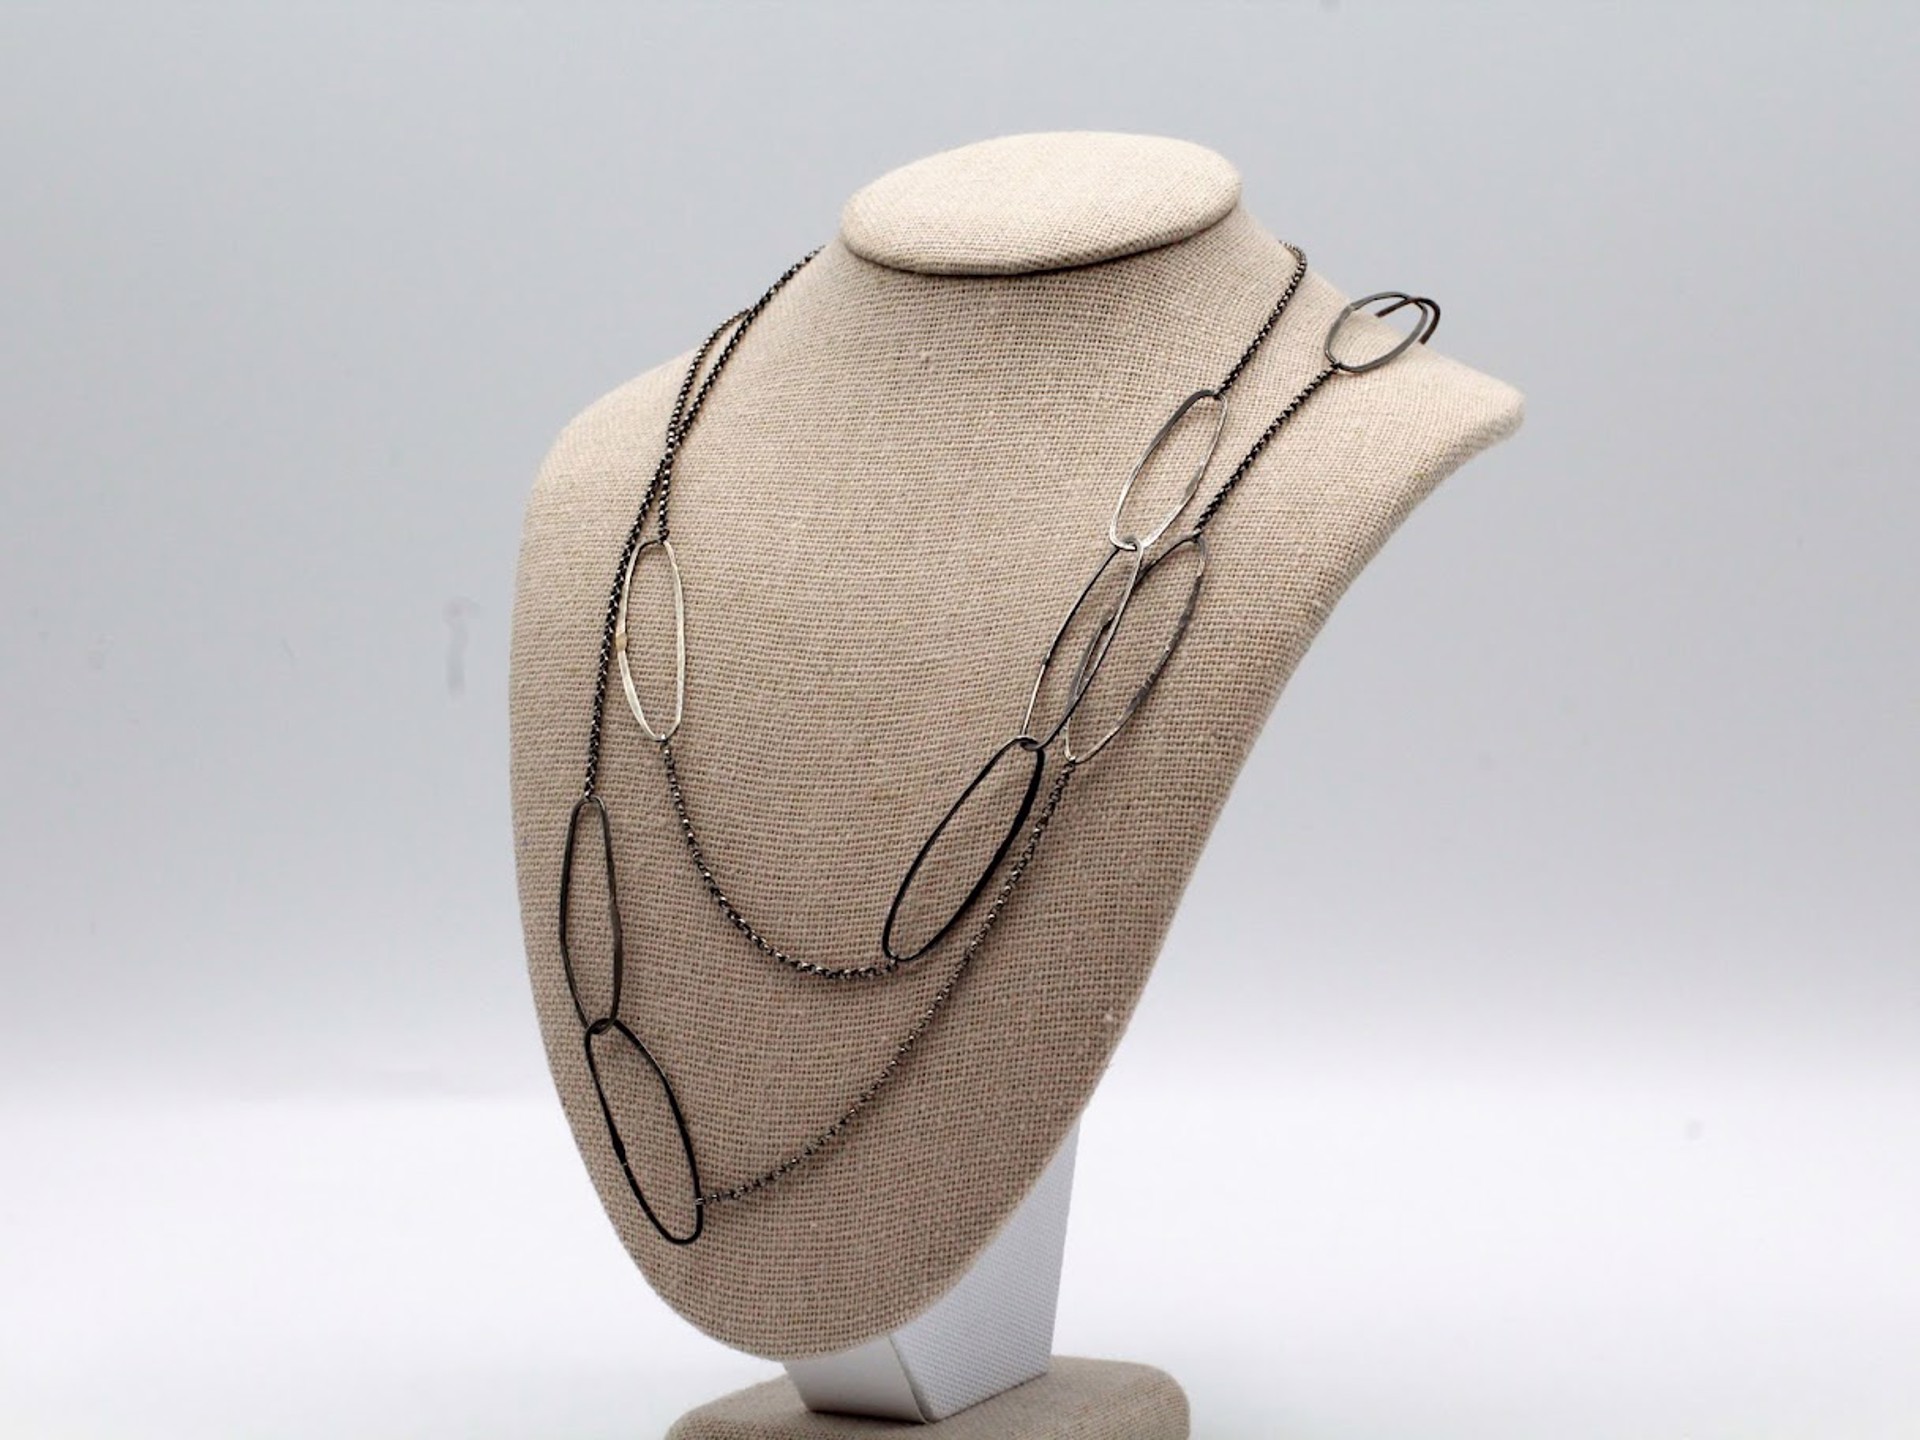 Dark Willow Necklace - 36" by April Hale